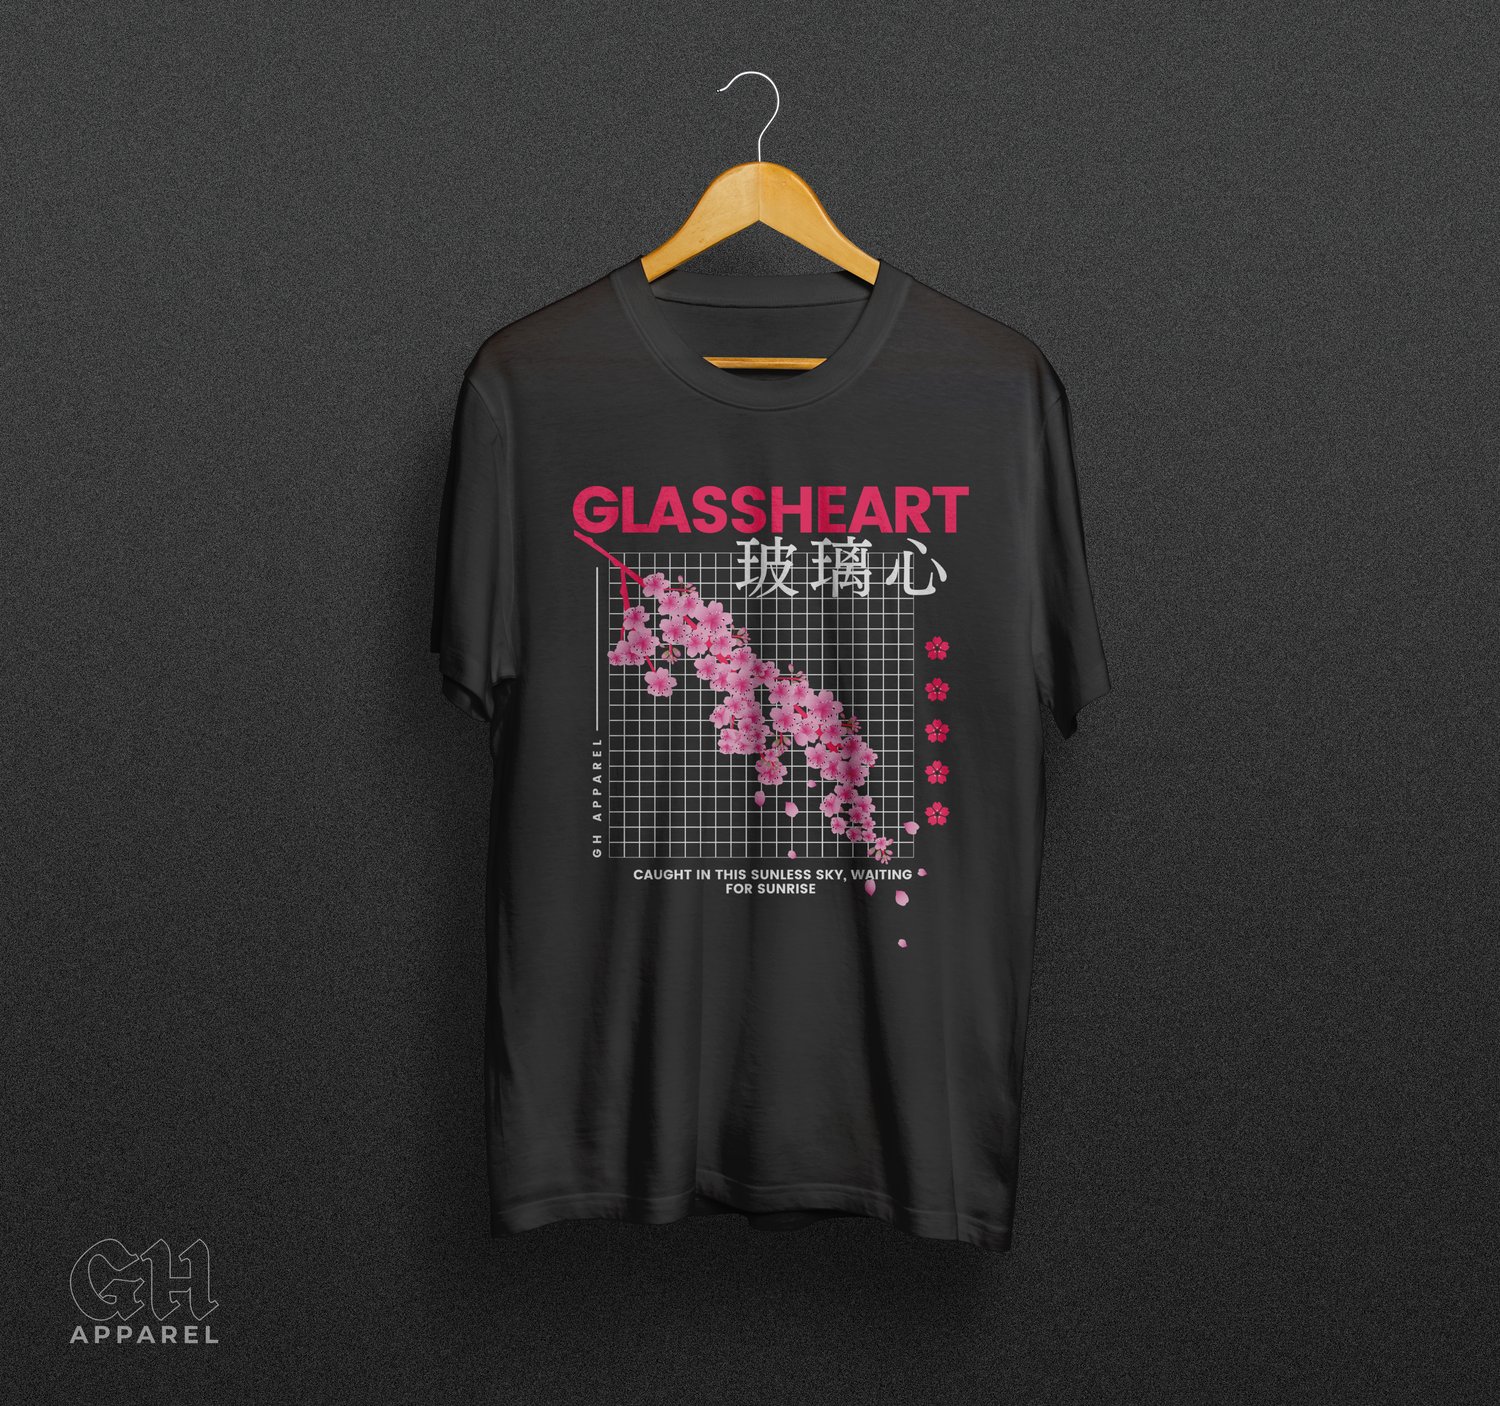 Image of GH Apparel // 𝕱𝖑𝖔𝖜𝖊𝖗𝕲𝖗𝖎𝖉 